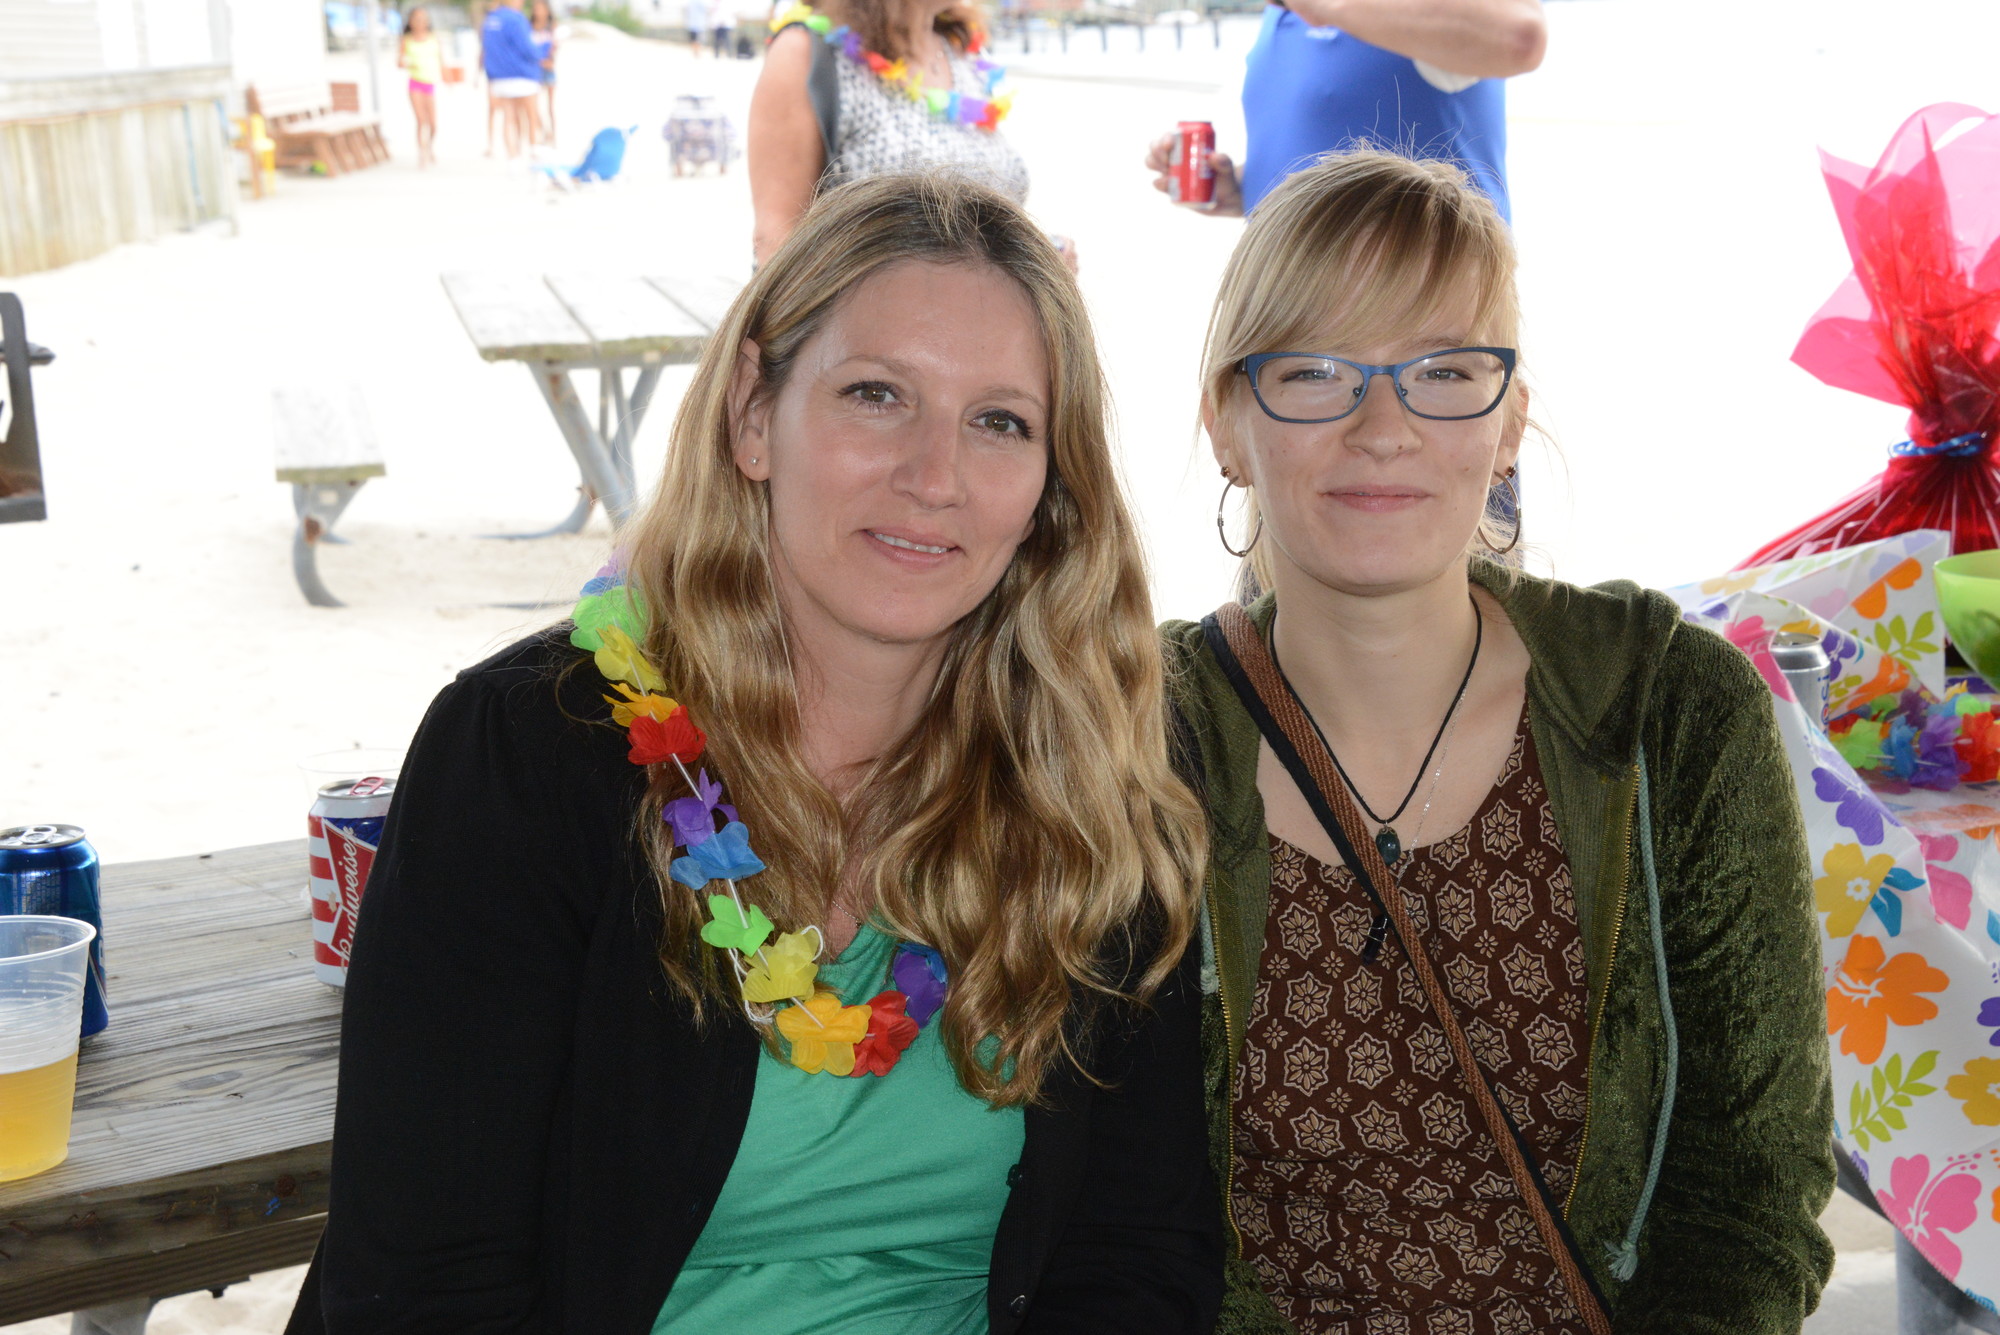 Karen Varrone and Kasia Szpak at the Calypso BBQ. Food, soda, beer, wine and live music were all featured at the event.